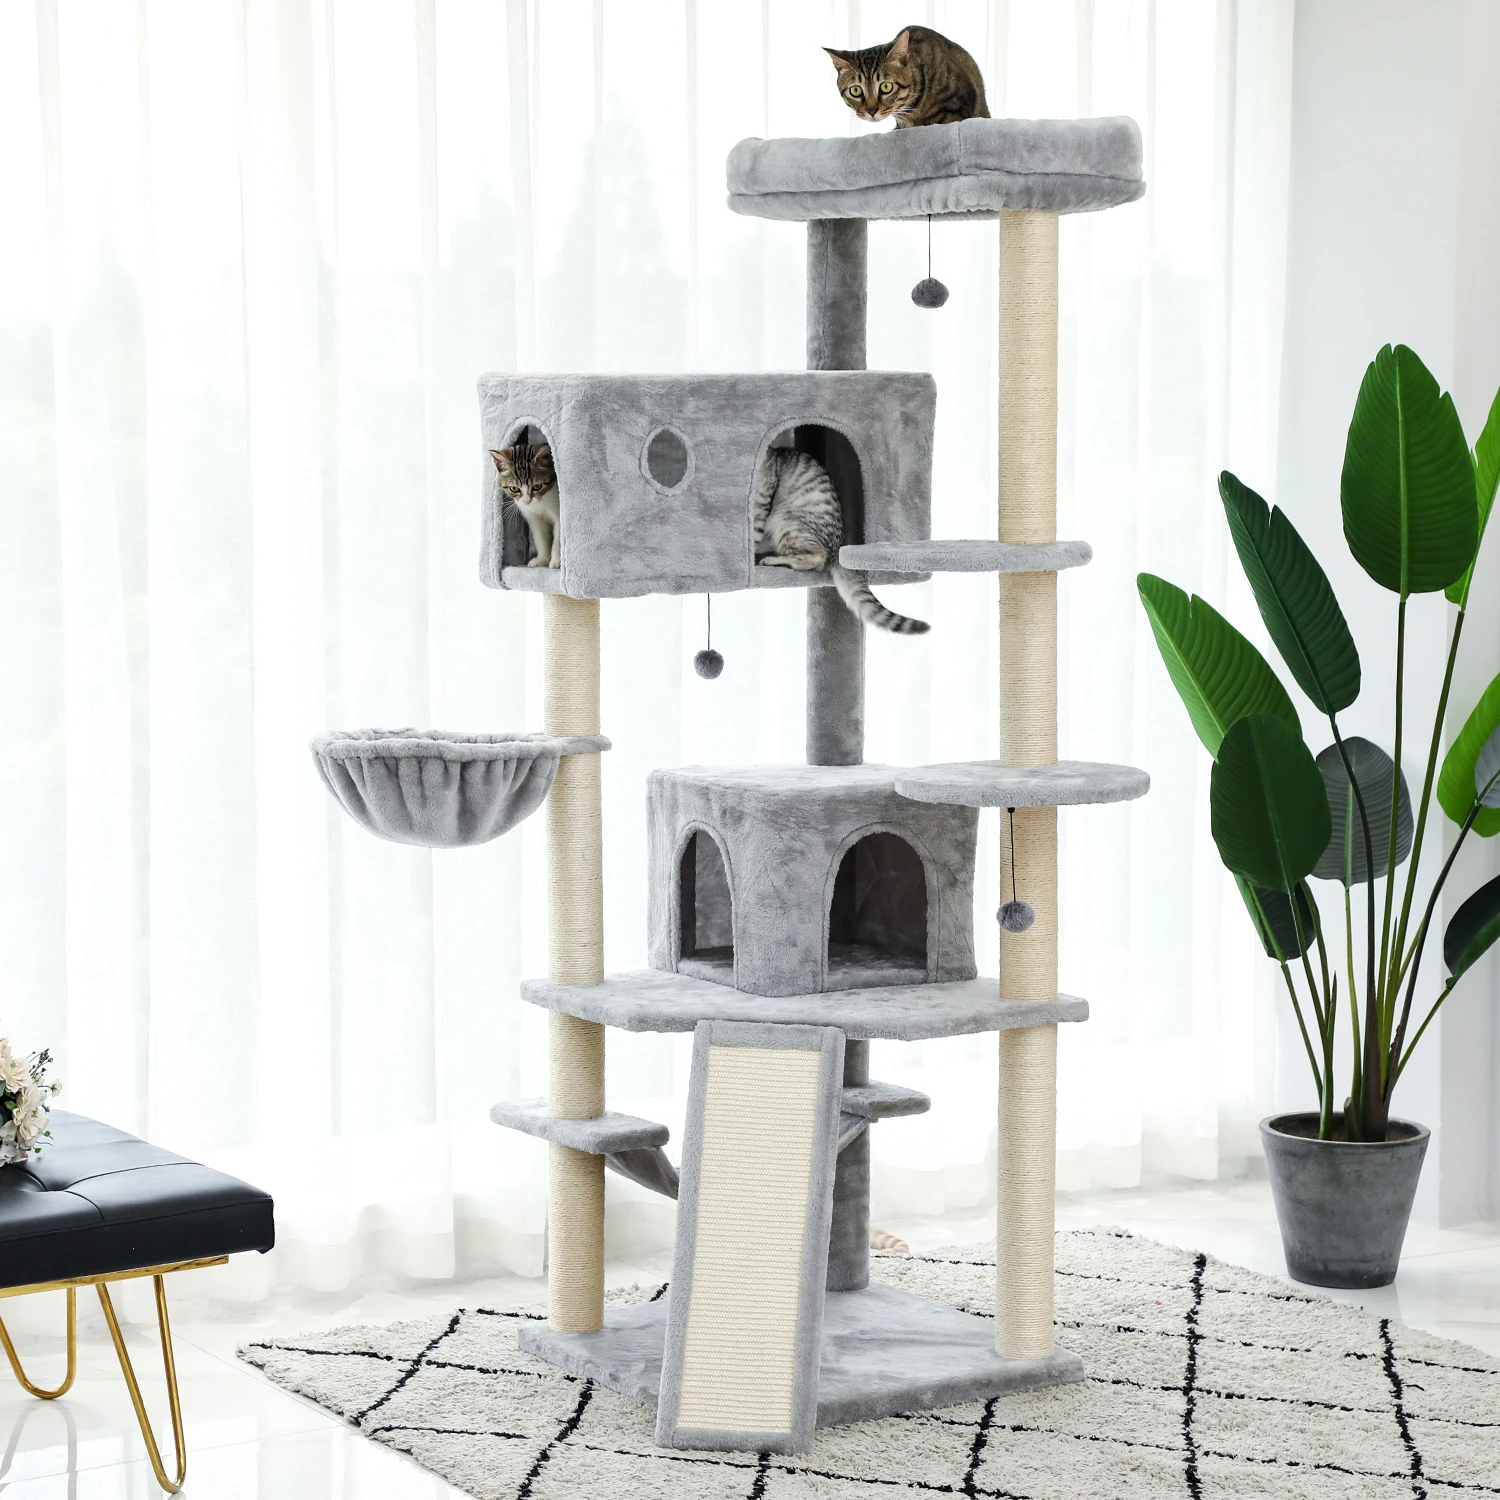 2021New Design Luxury Large Cat Climbing Frame Multi-Layer Scratching Post With Resistant Sisal Cat Tree Kittern Playground